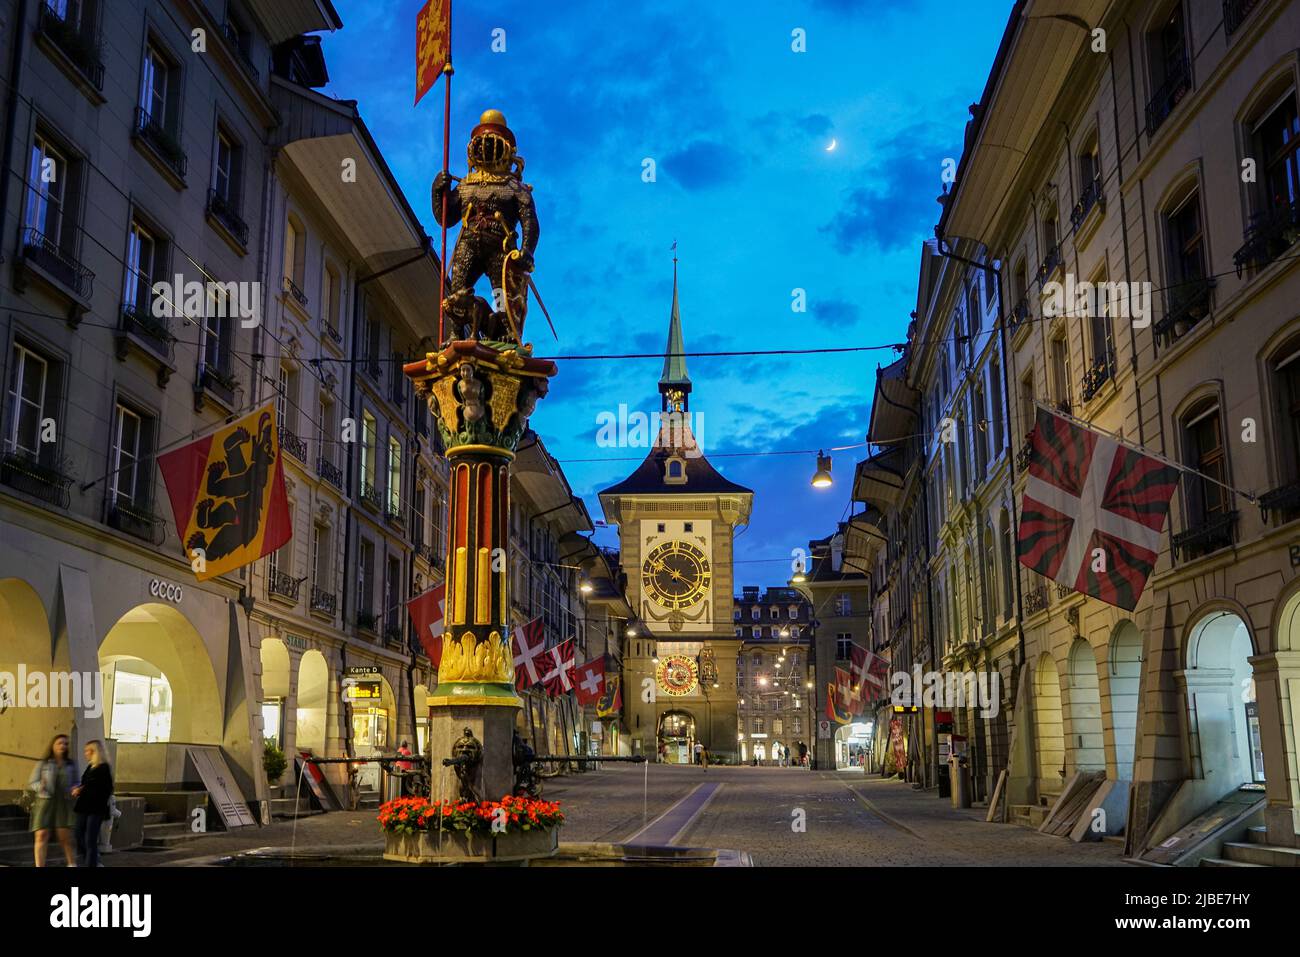 Night scene along Kramgasse in the old town featuring the Zytglogge Clock Tower. Bern, Switzerland - Junew 2022 Stock Photo